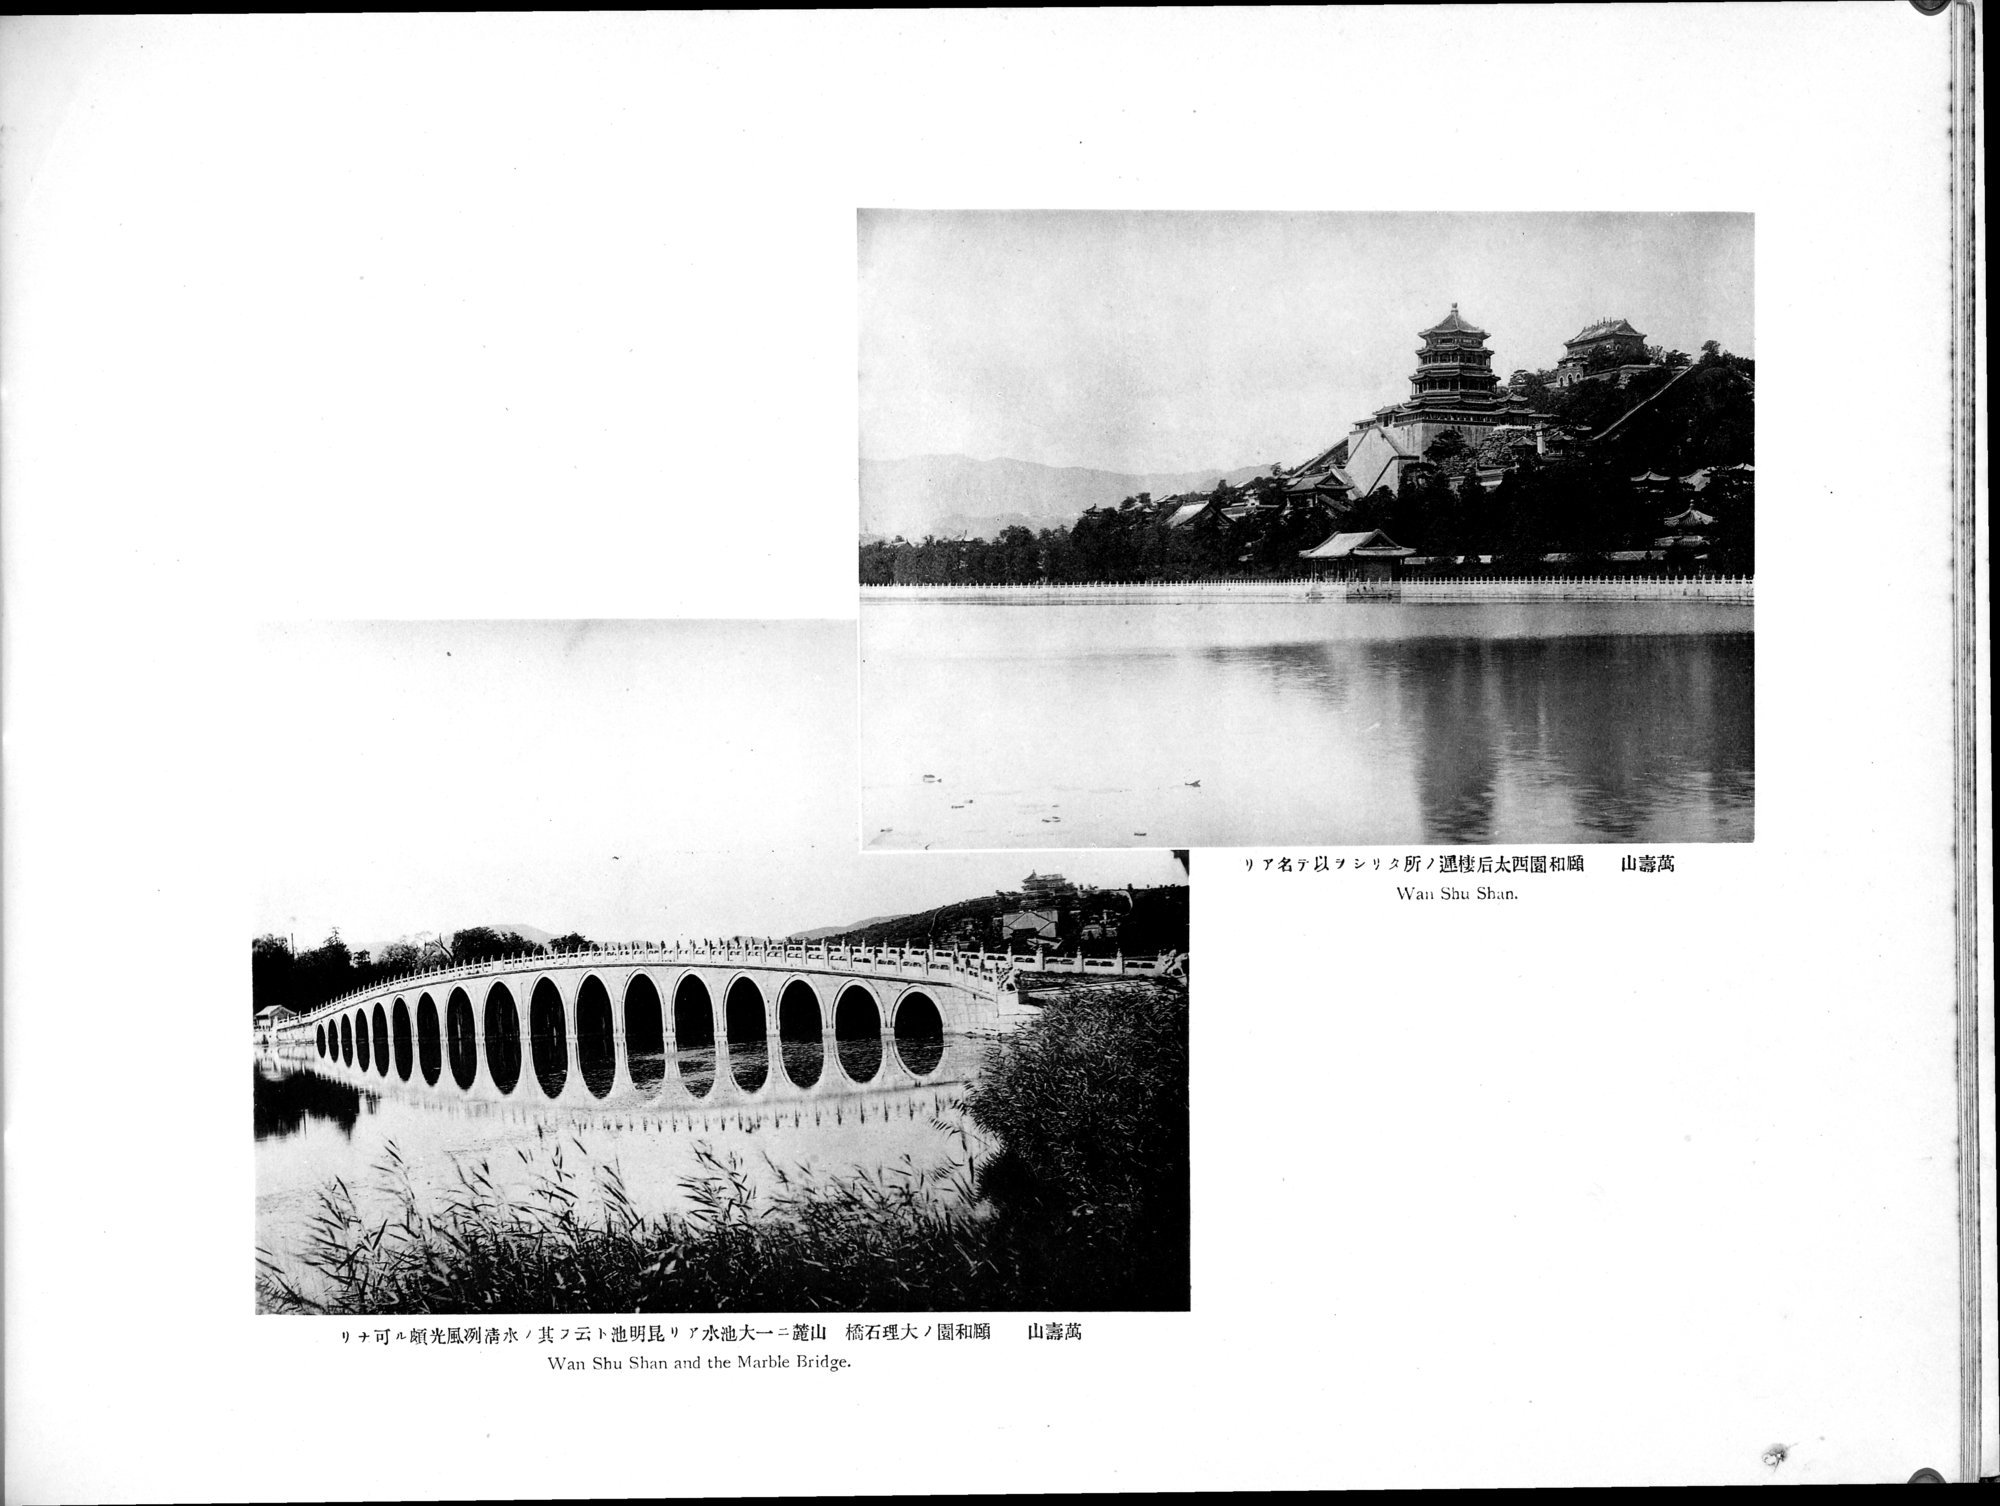 Views and Custom of North China : vol.1 / Page 185 (Grayscale High Resolution Image)